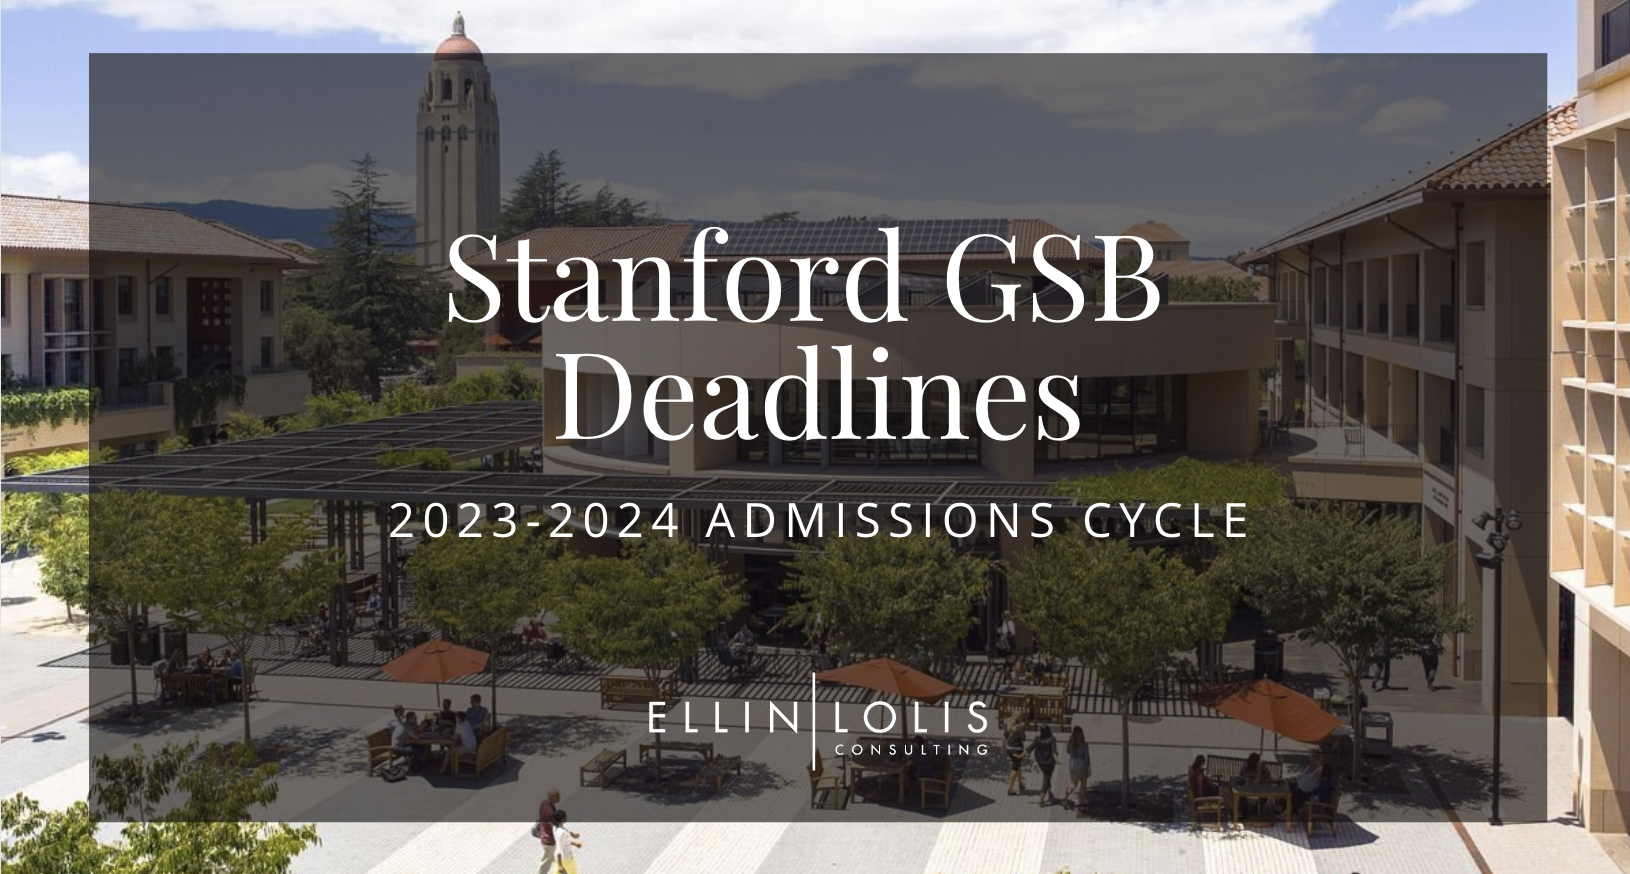 Stanford GSB MBA Deadlines for 2023-2024